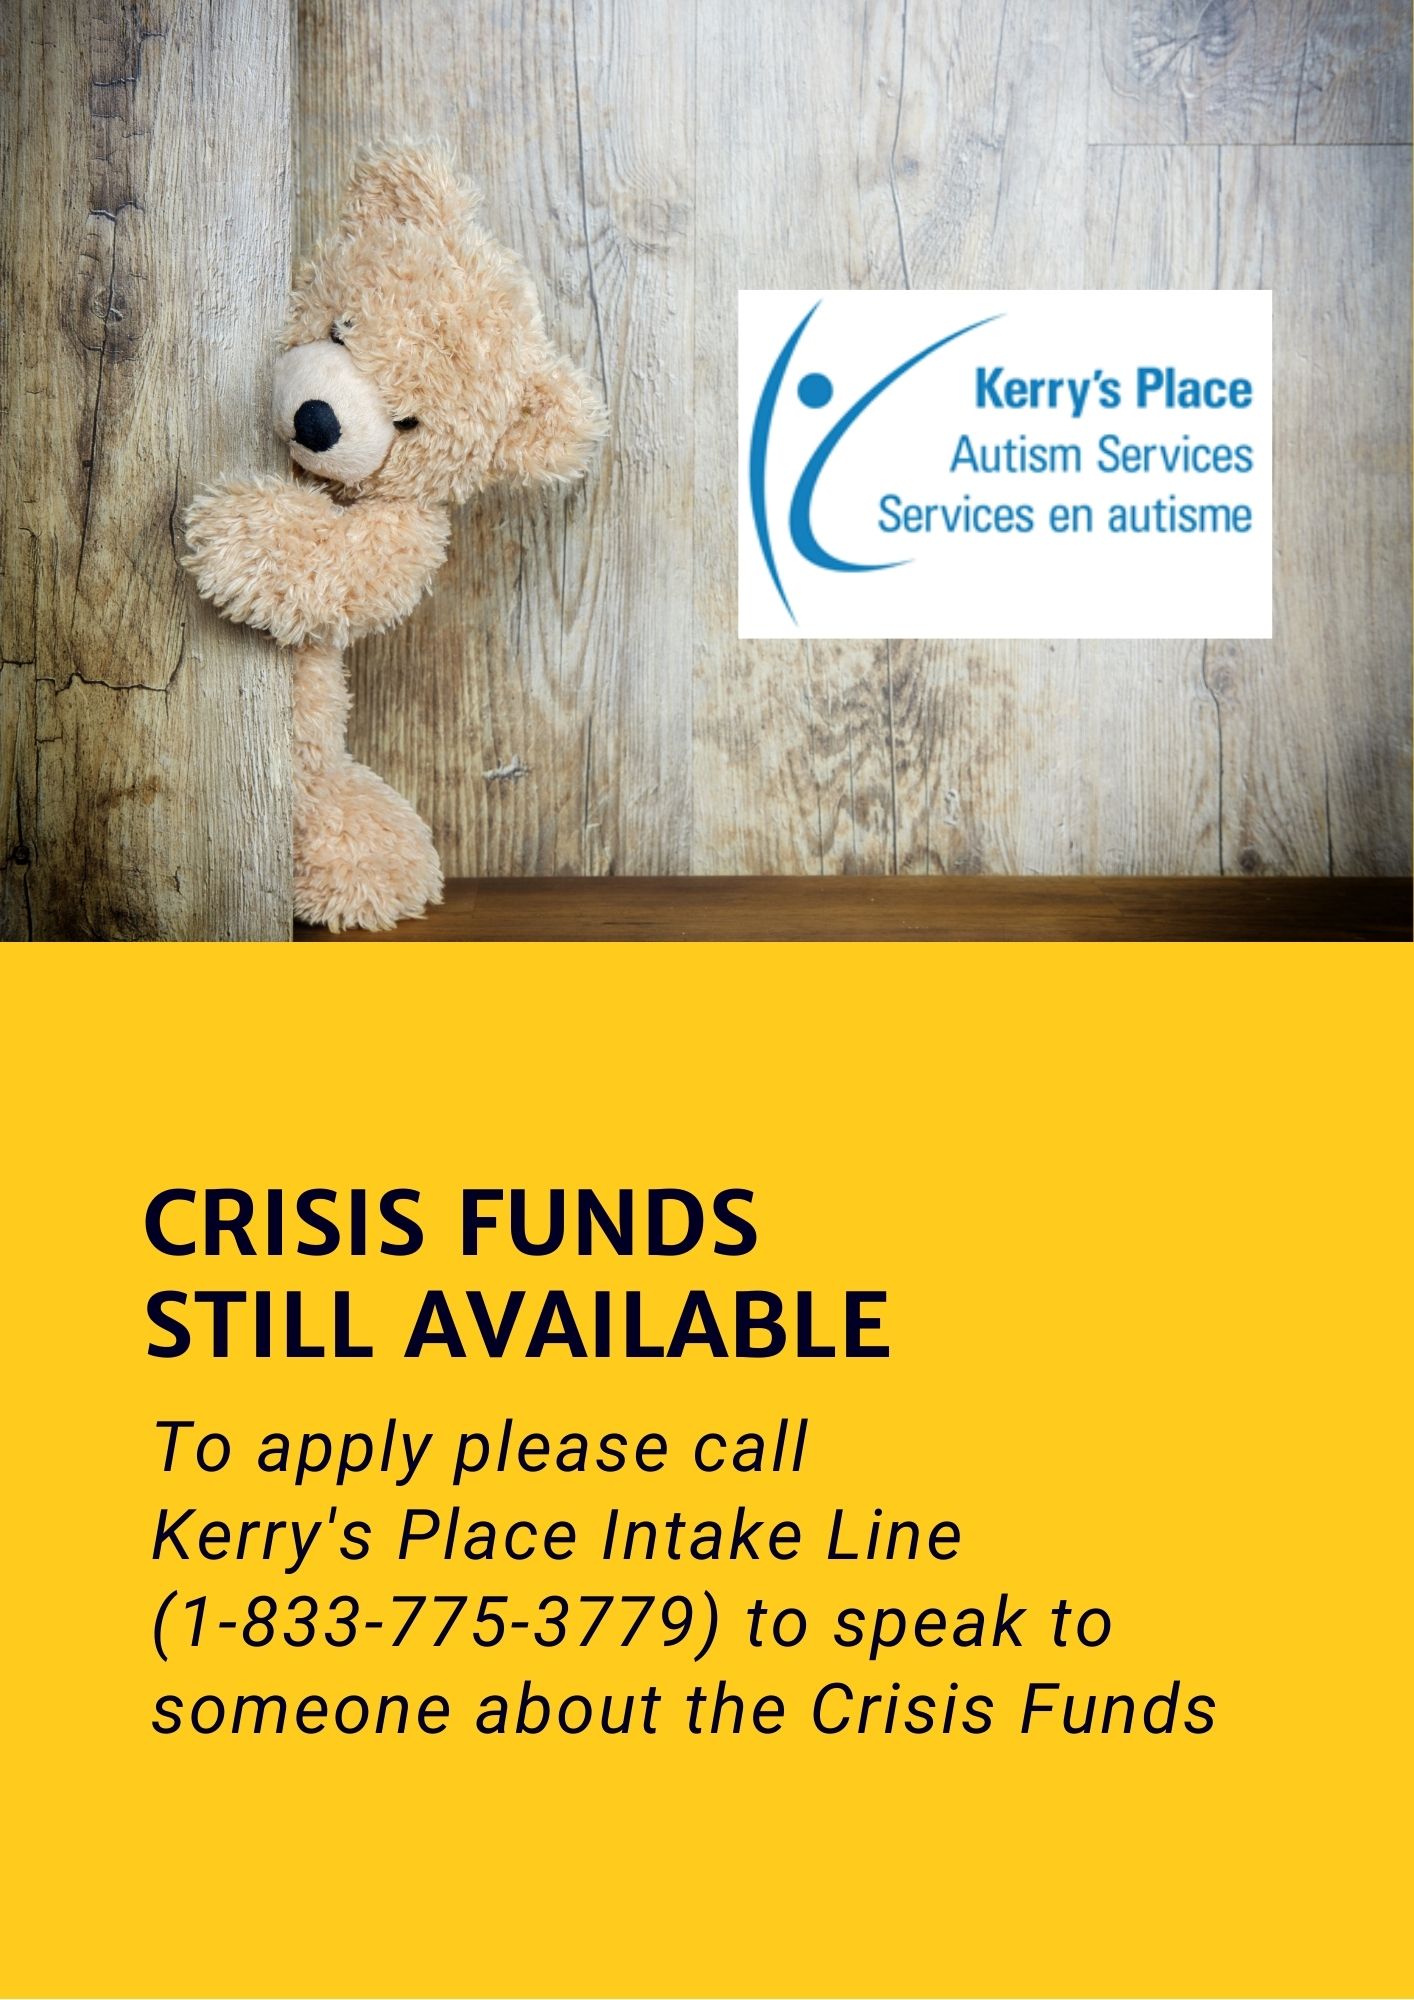 Kerry's Place Crisis Funds Still Available Flyer